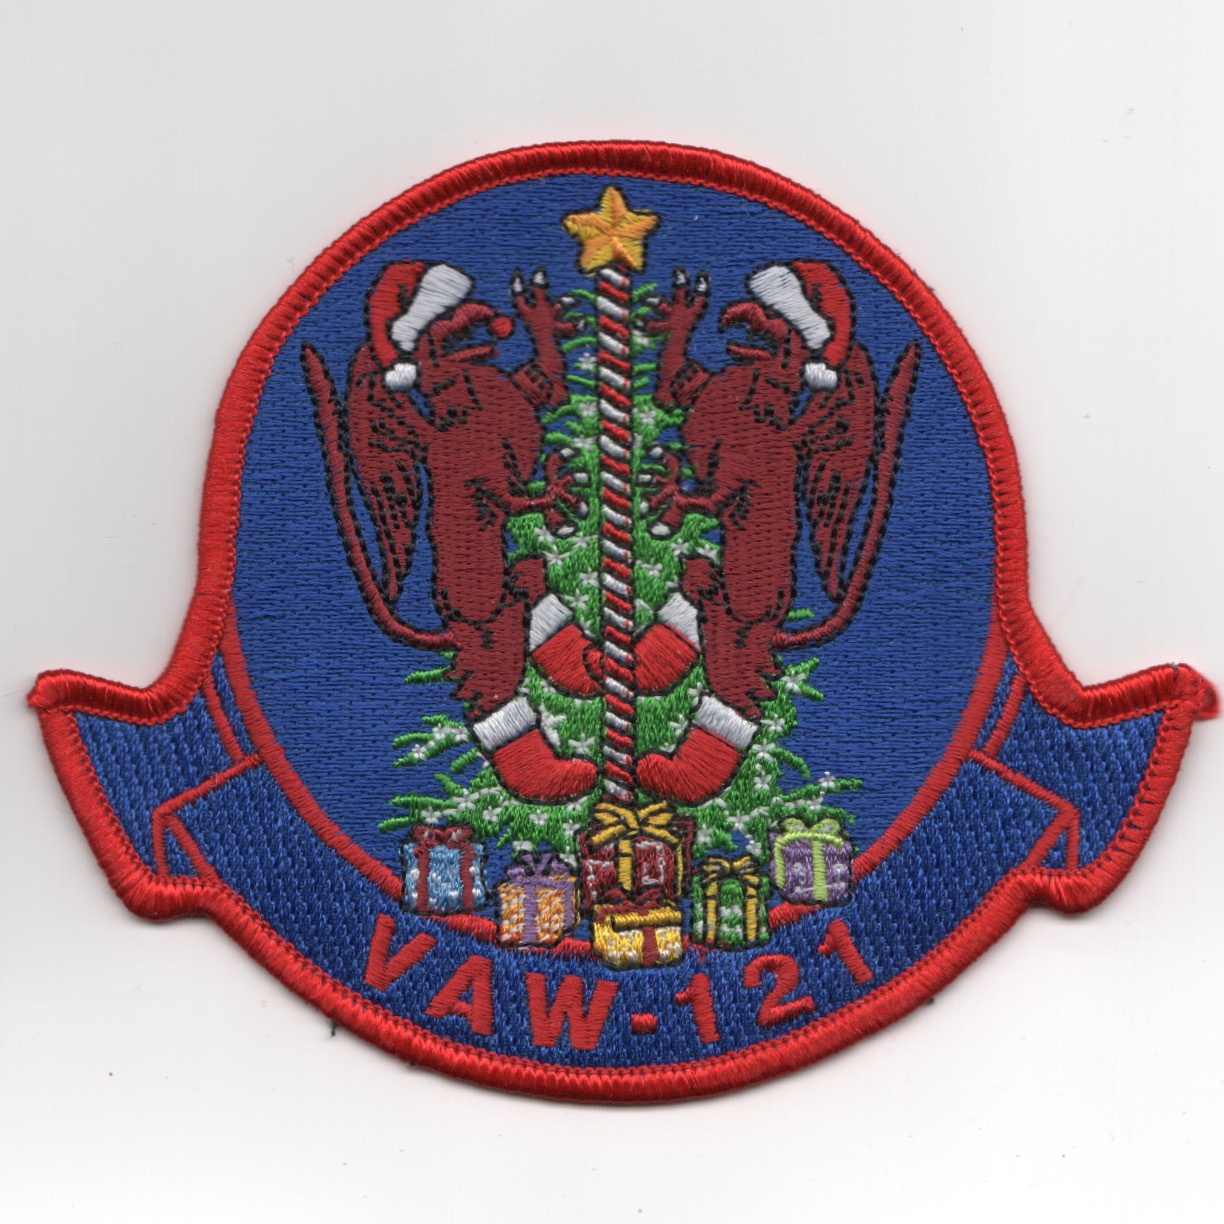 VAW-121 Squadron 'CHRISTmas' Patch (Blue)